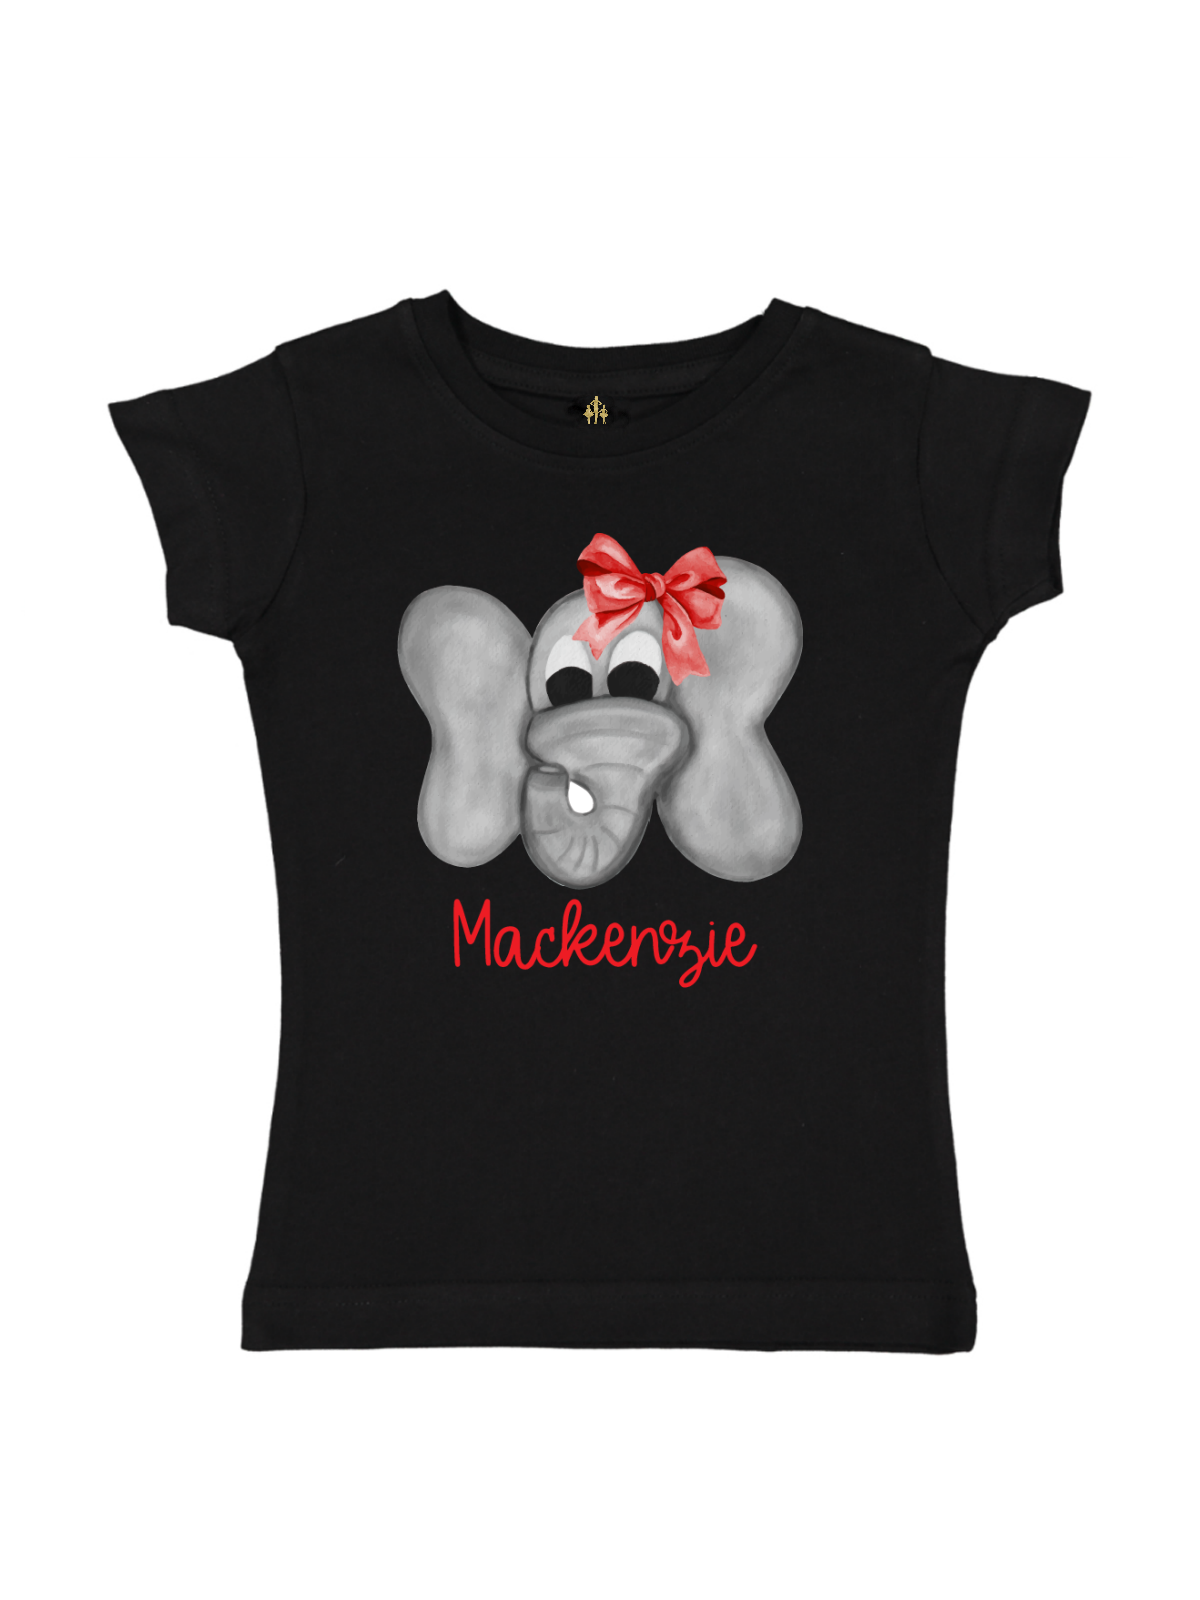 girls christmas elephant in red bow t-shirt